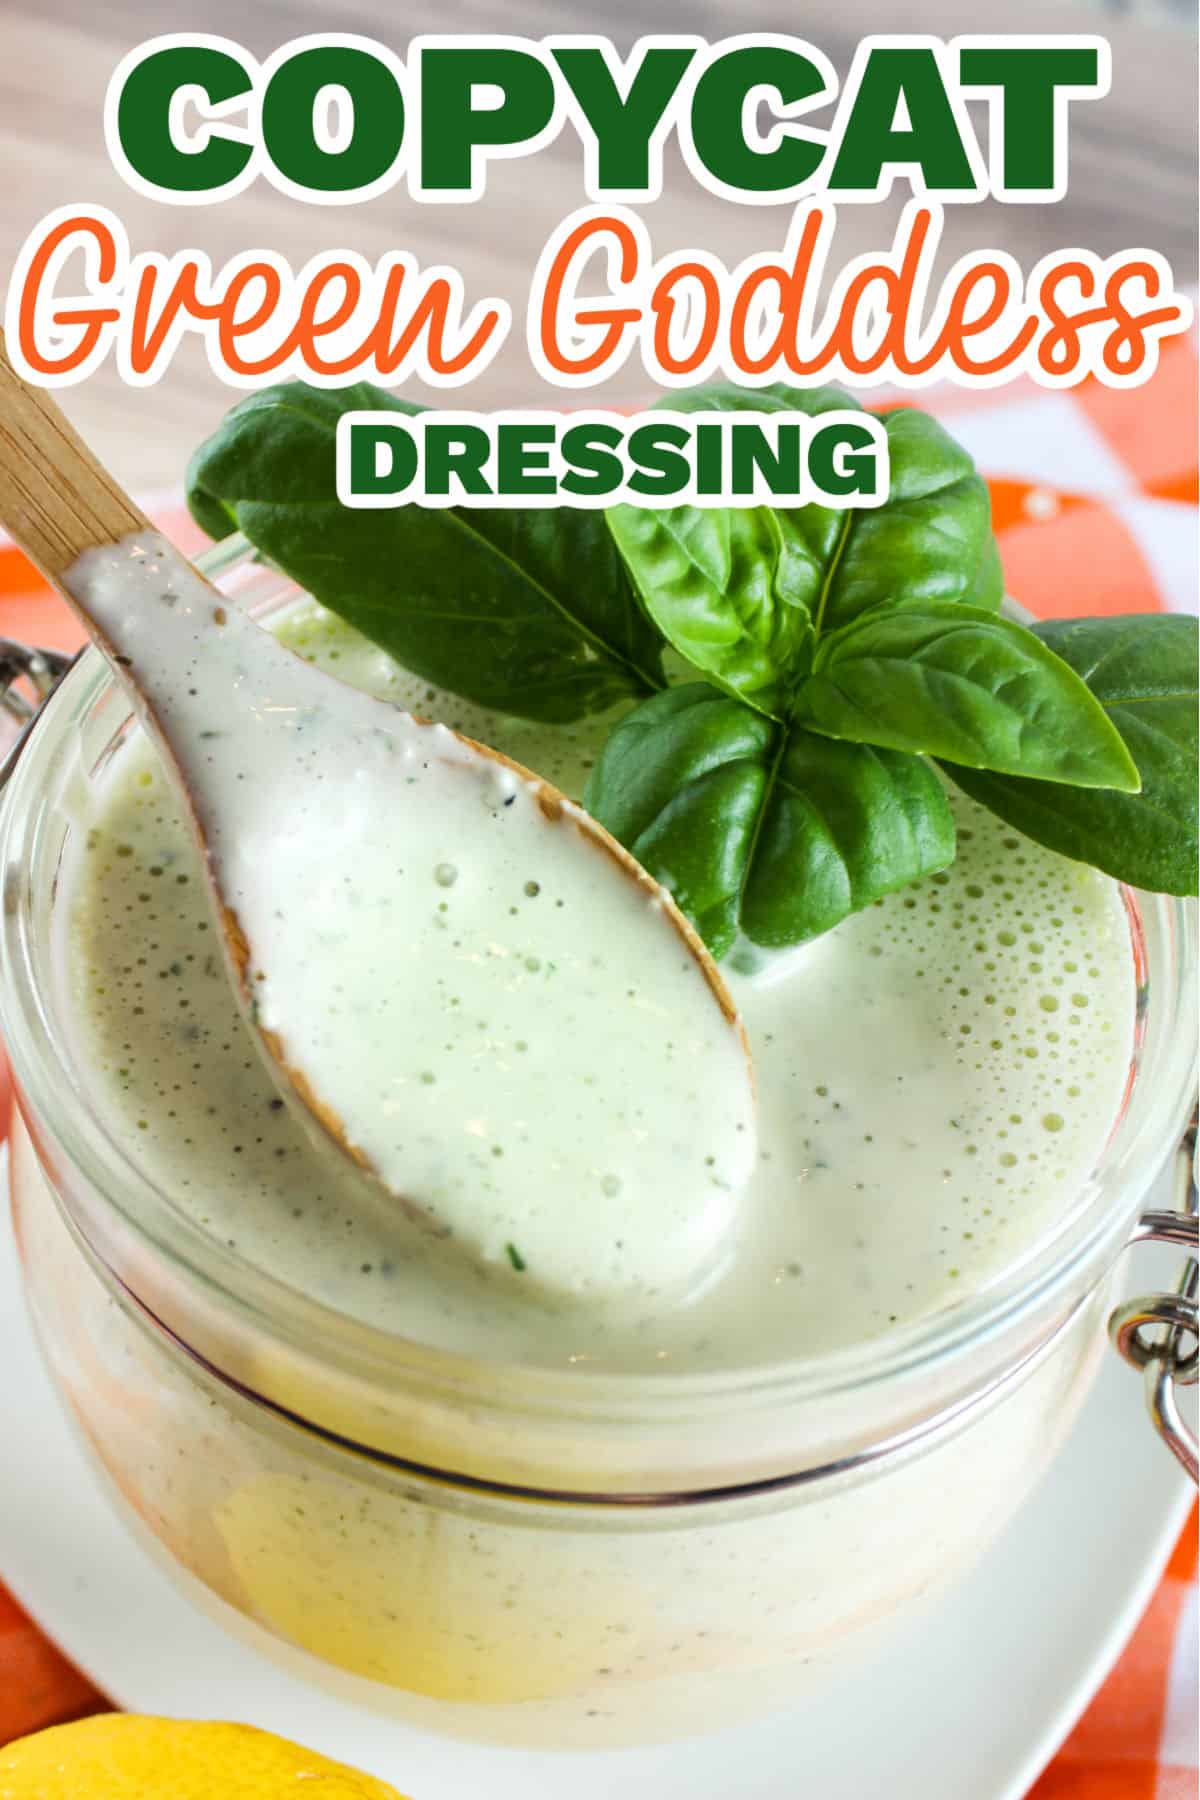 Panera Bread's Green Goddess Salad Dressing is a classic and it's easy to make. This delicious dressing is great on a Cobb salad, as a dressing for a cold pasta salad or a dip for veggies or french fries!  via @foodhussy